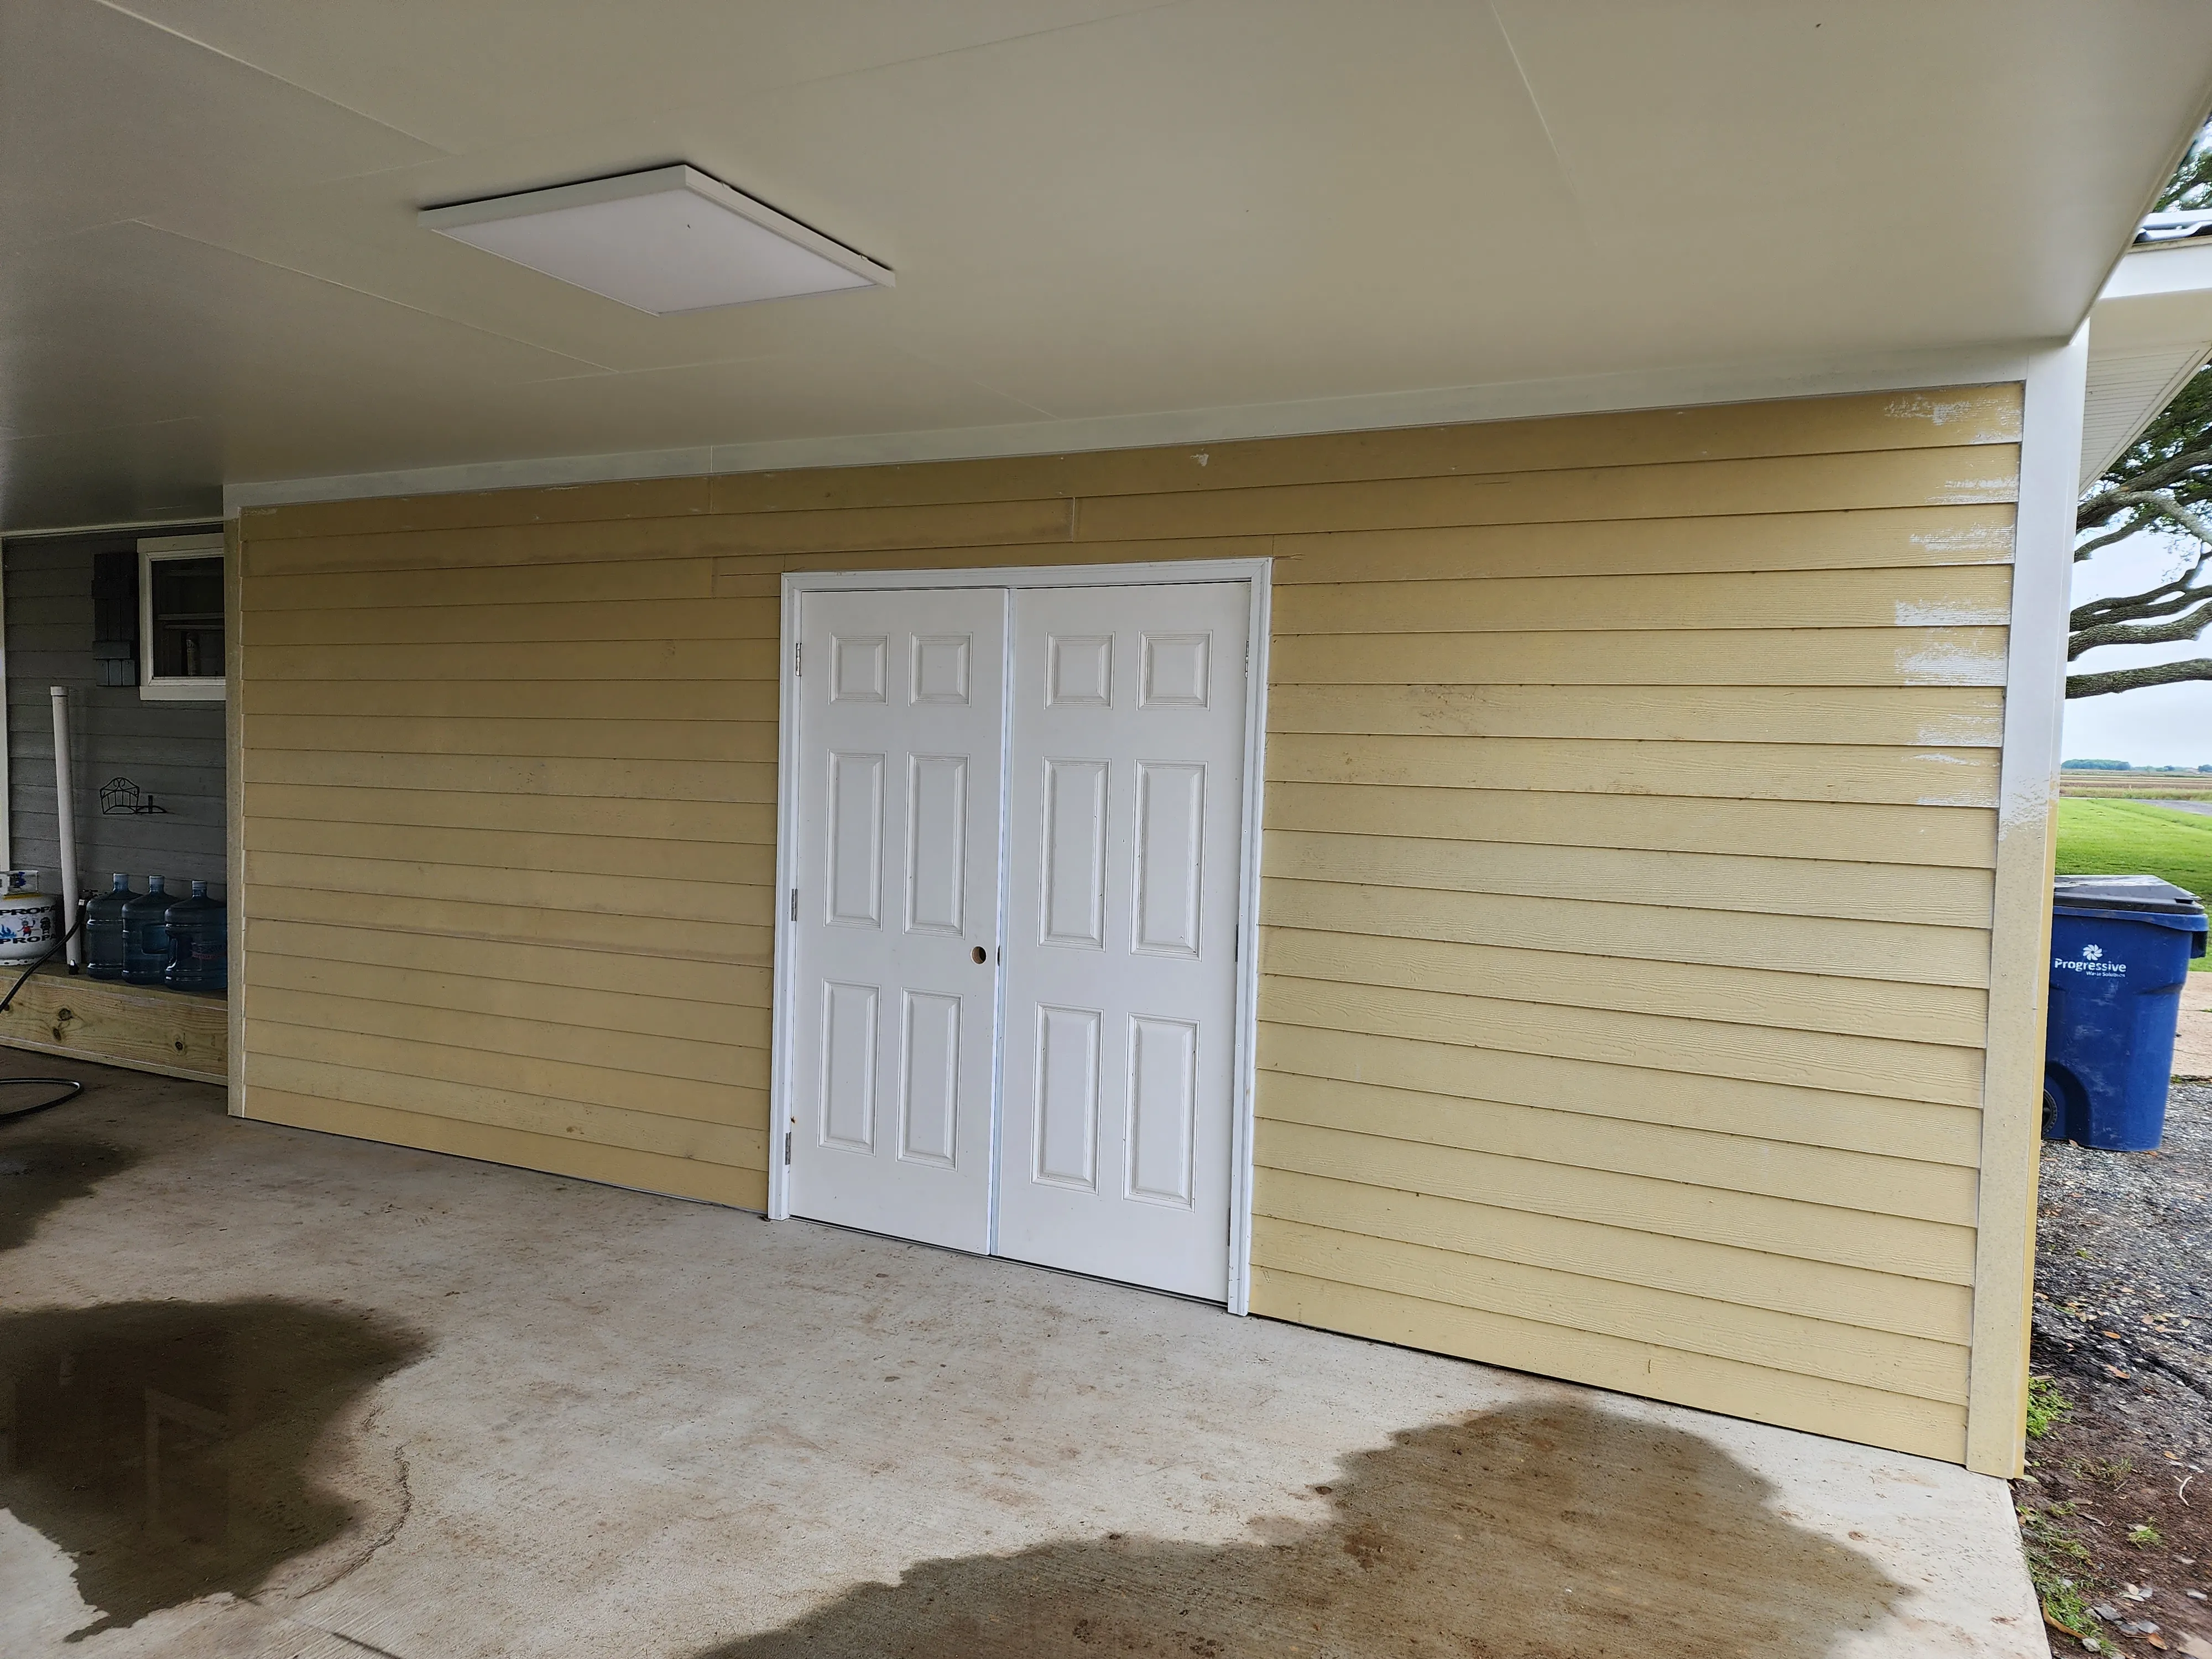 Interior Painting for All South Painting in Erath, LA